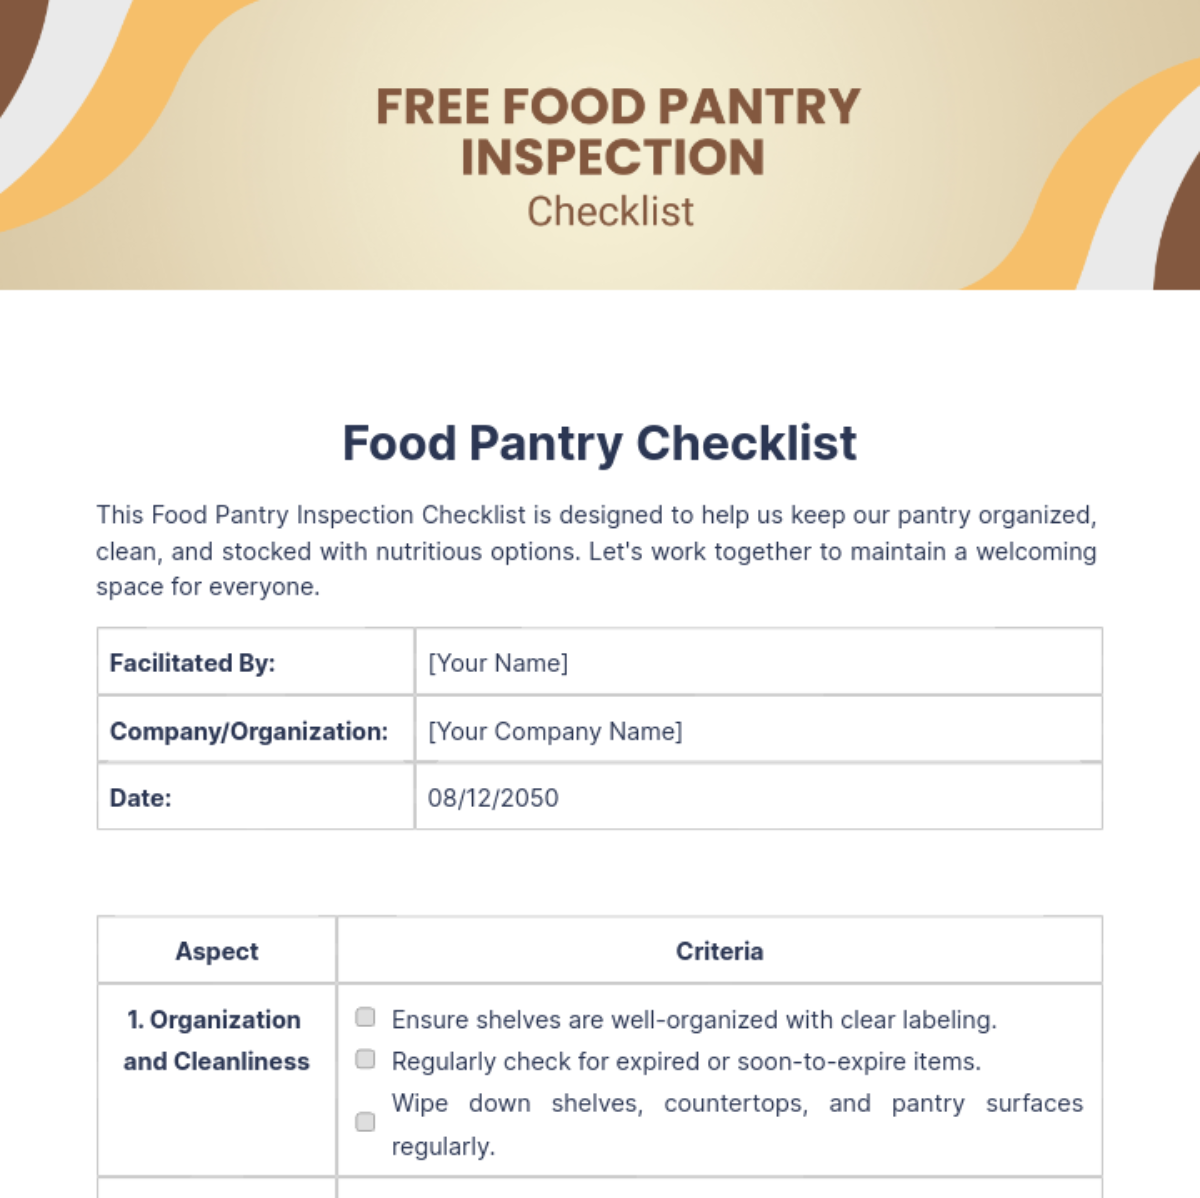 Free Food Pantry Inspection Checklist Template